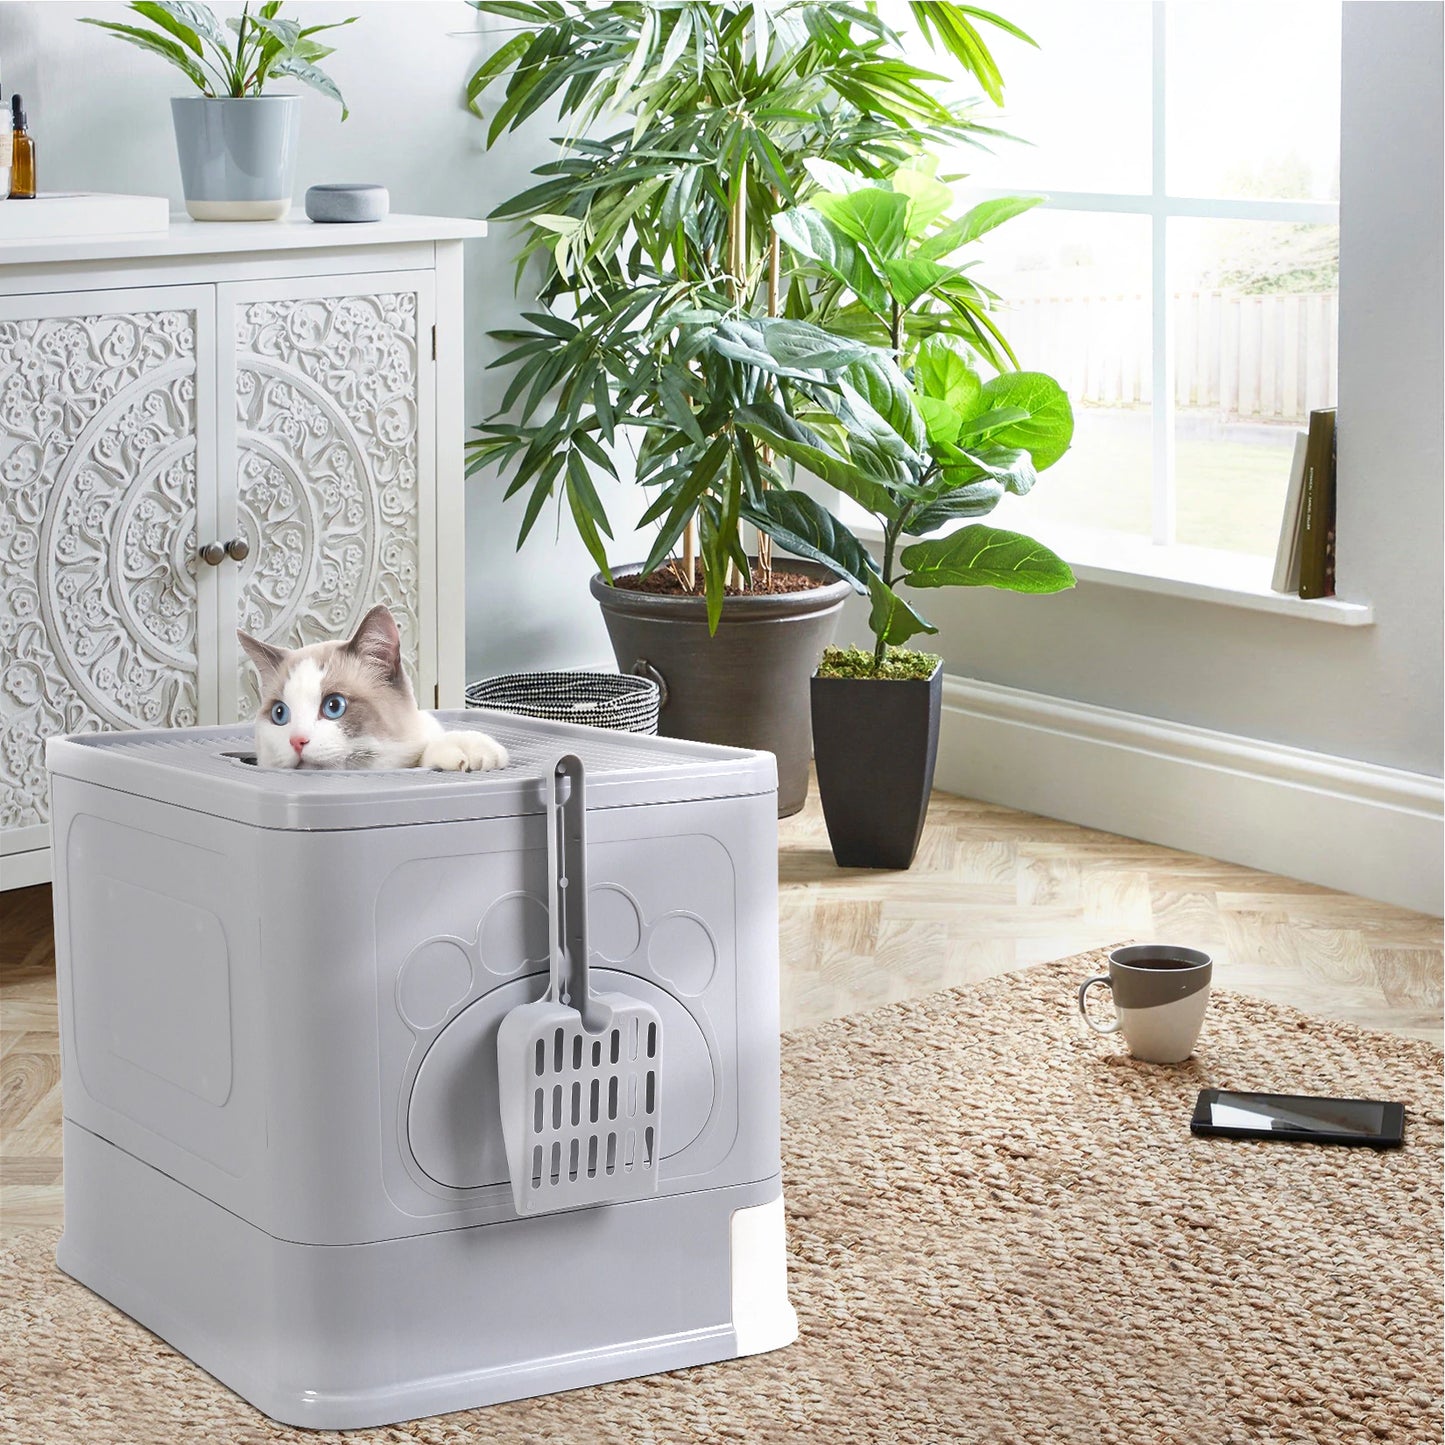 Cat Litter Box Fully Enclosed and Foldable,Top Entry Litter Box Storage and Deodorization Easy to Clean Covered Litter Box